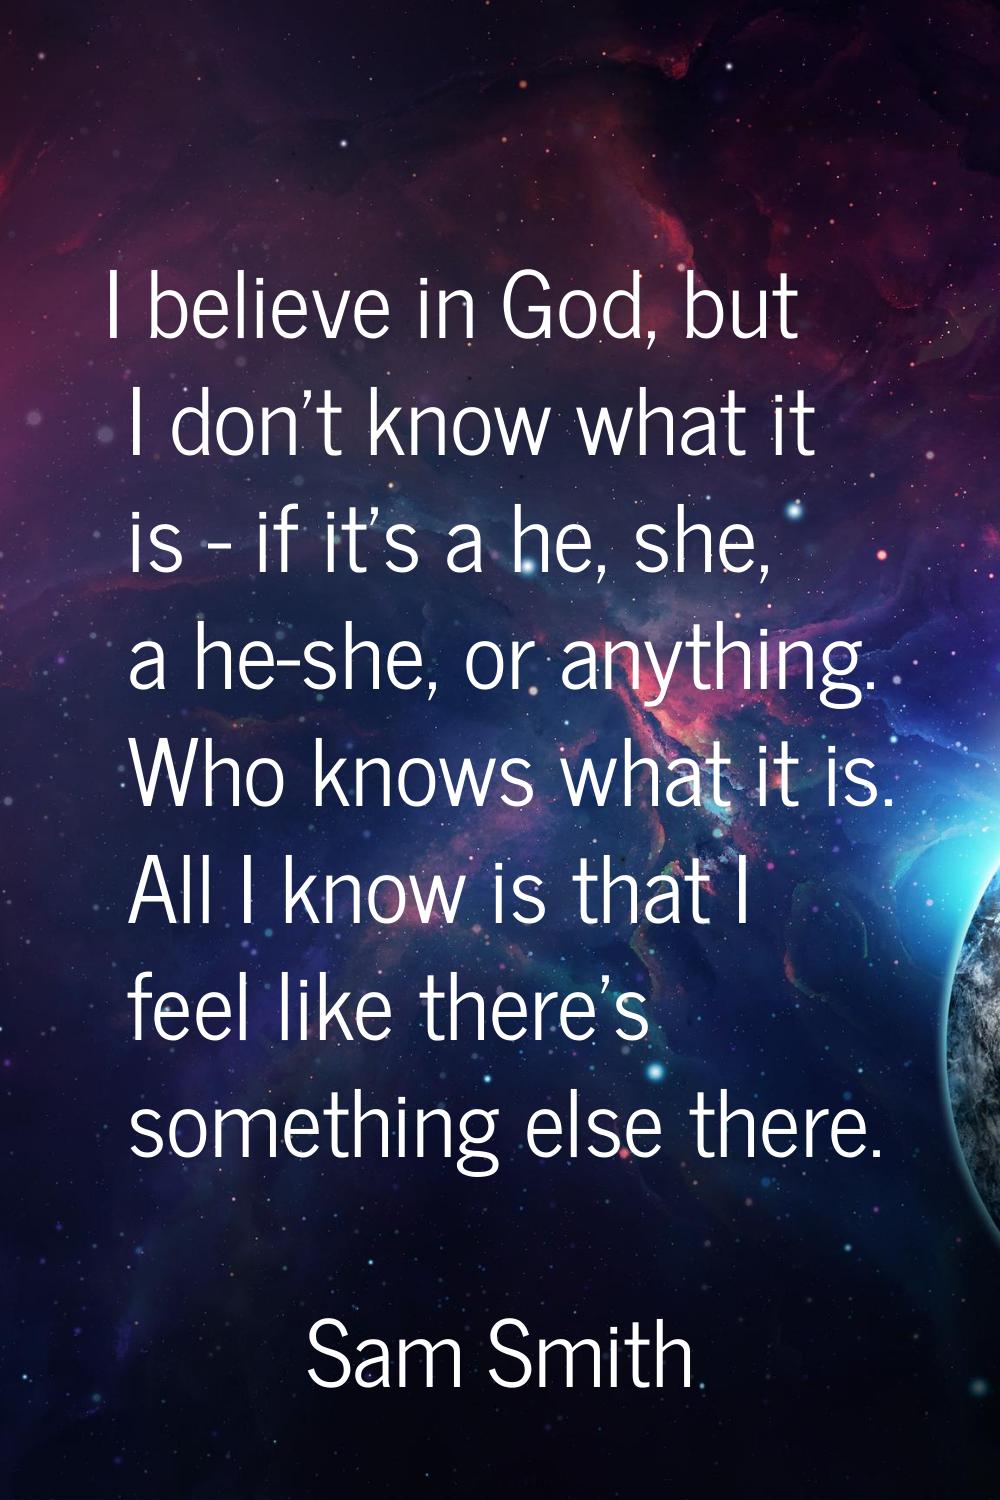 I believe in God, but I don't know what it is - if it's a he, she, a he-she, or anything. Who knows